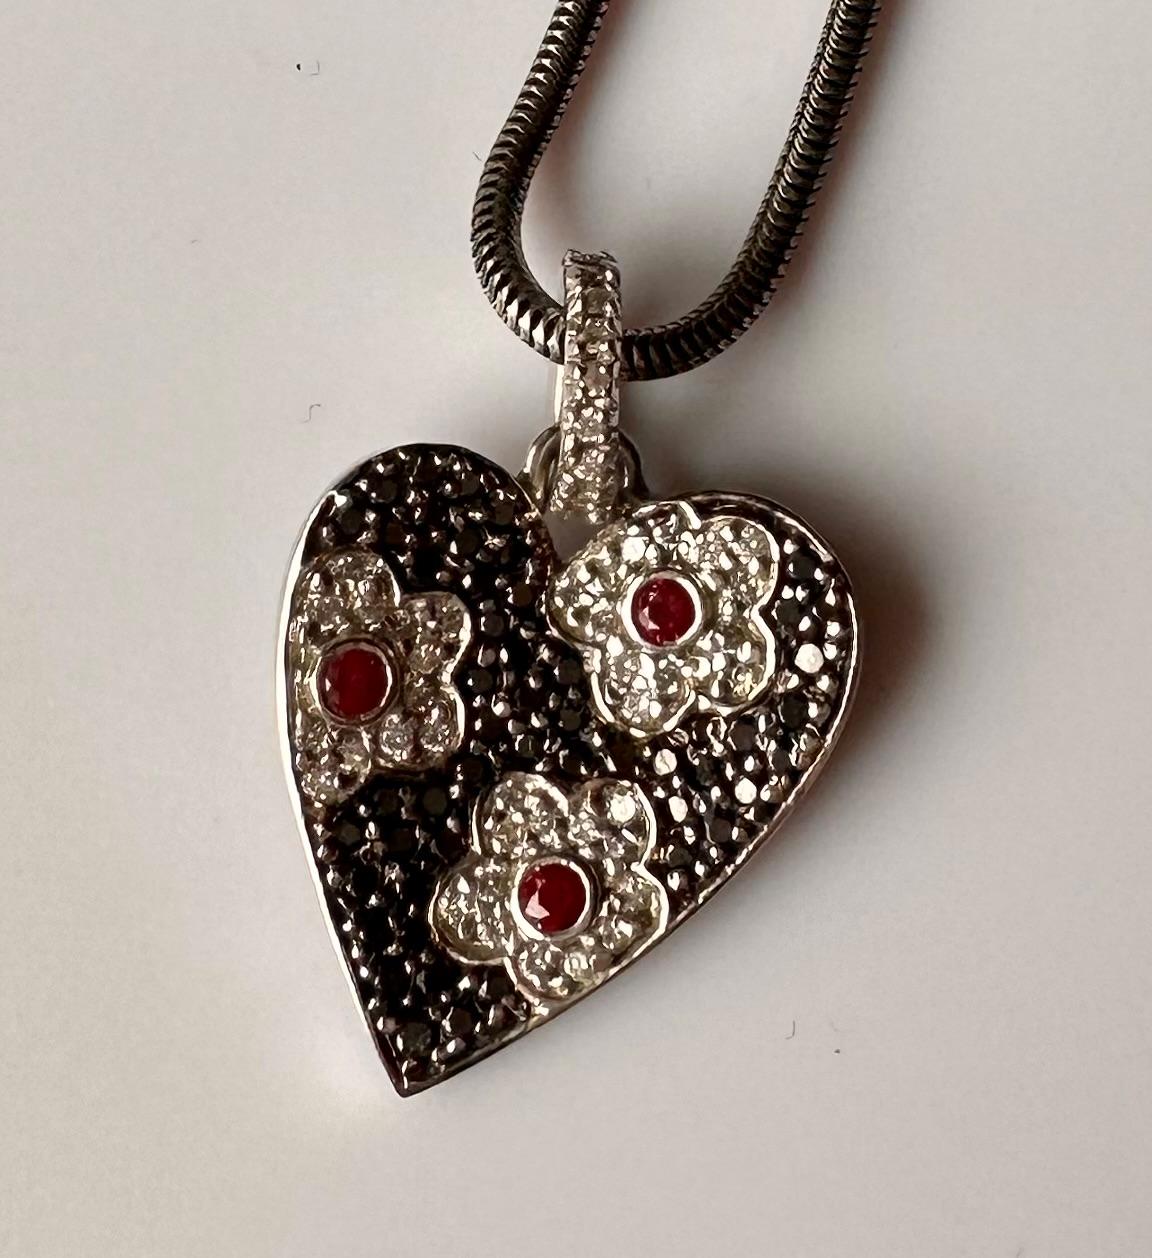 Women's or Men's An 18kt White Gold Heart Shaped Pendant set with Rubies & Diamonds. For Sale